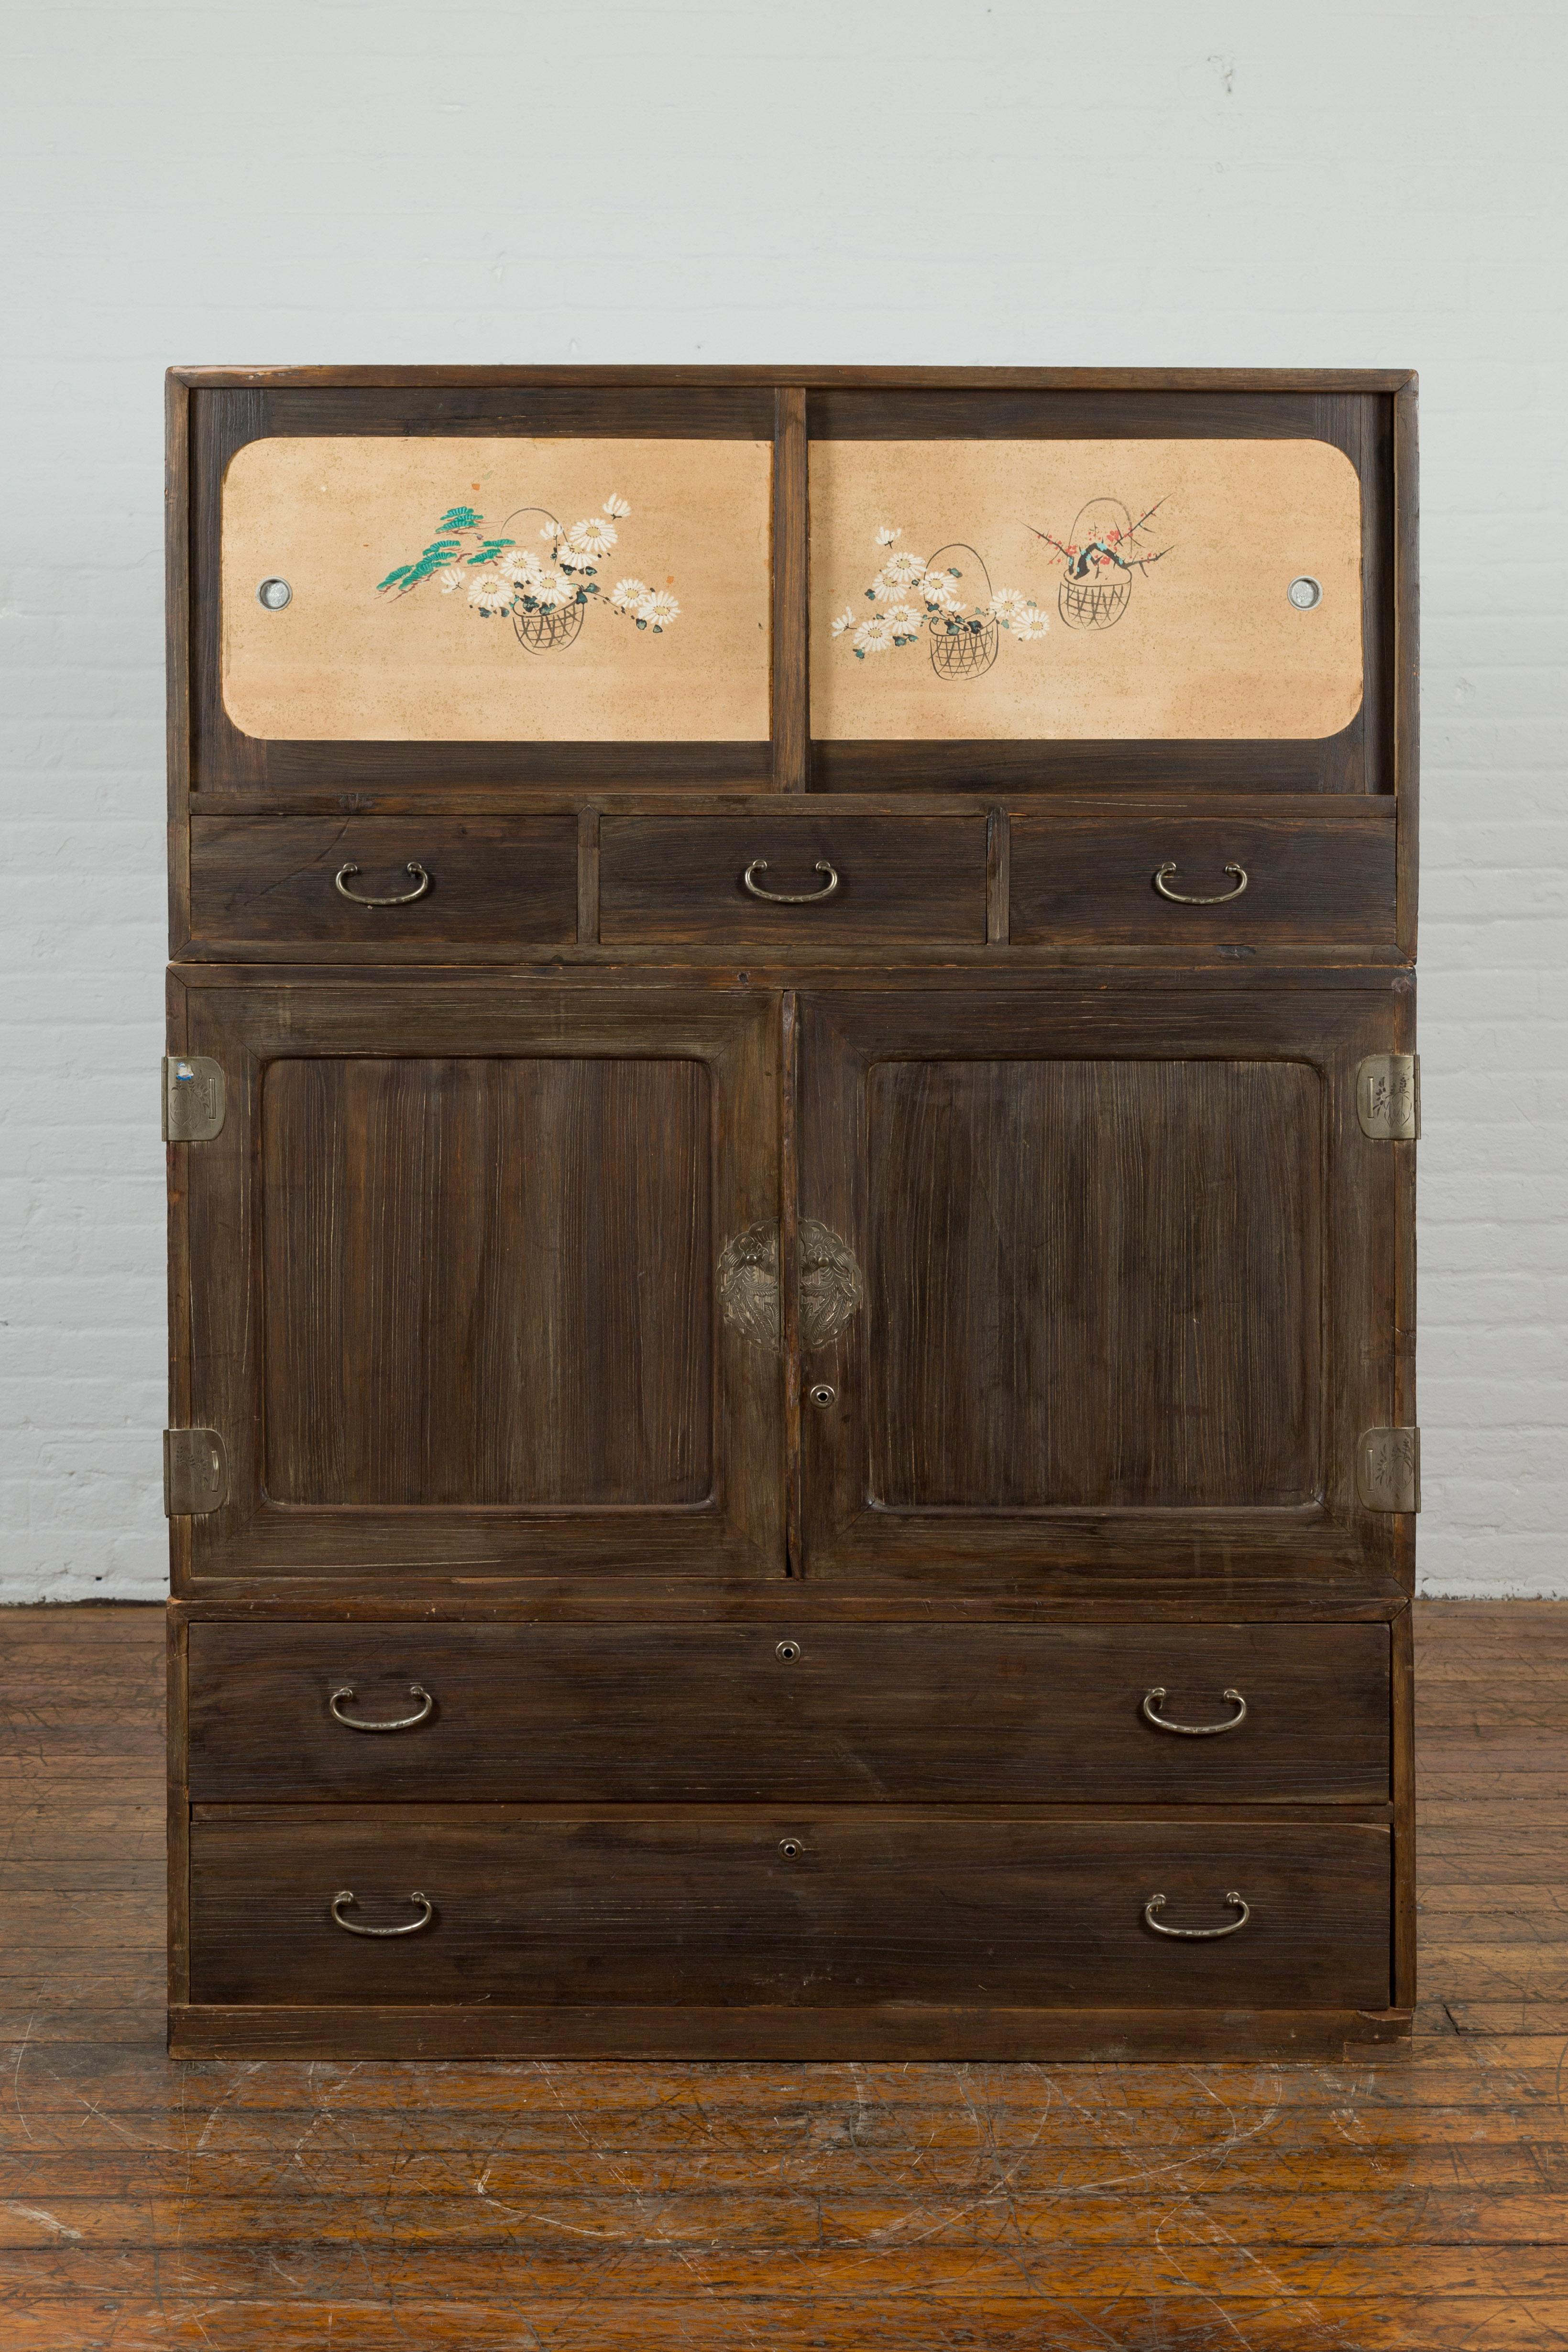 This stunning Japanese Taisho vintage cabinet is a favorite addition to our antique and vintage cabinets collection. Crafted during the early 20th century, this large vintage cabinet is made of wood that comes from the Kiri tree - also called the